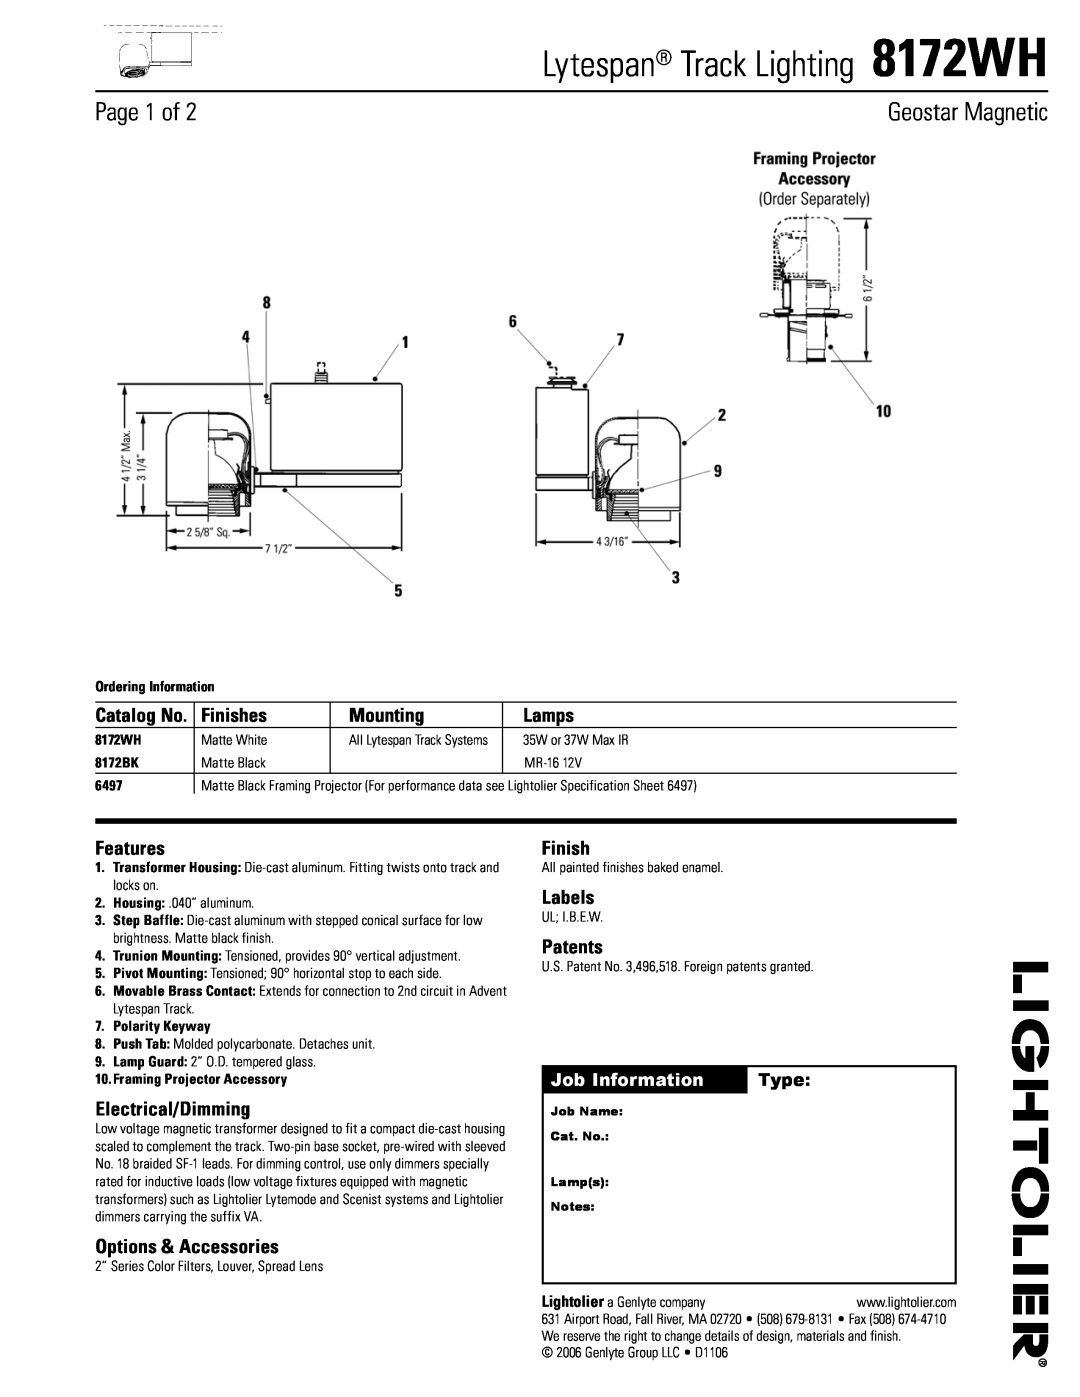 Lightolier 8172WH specifications Page of, Geostar Magnetic, Finishes, Mounting, Lamps, Features, Electrical/Dimming, Type 